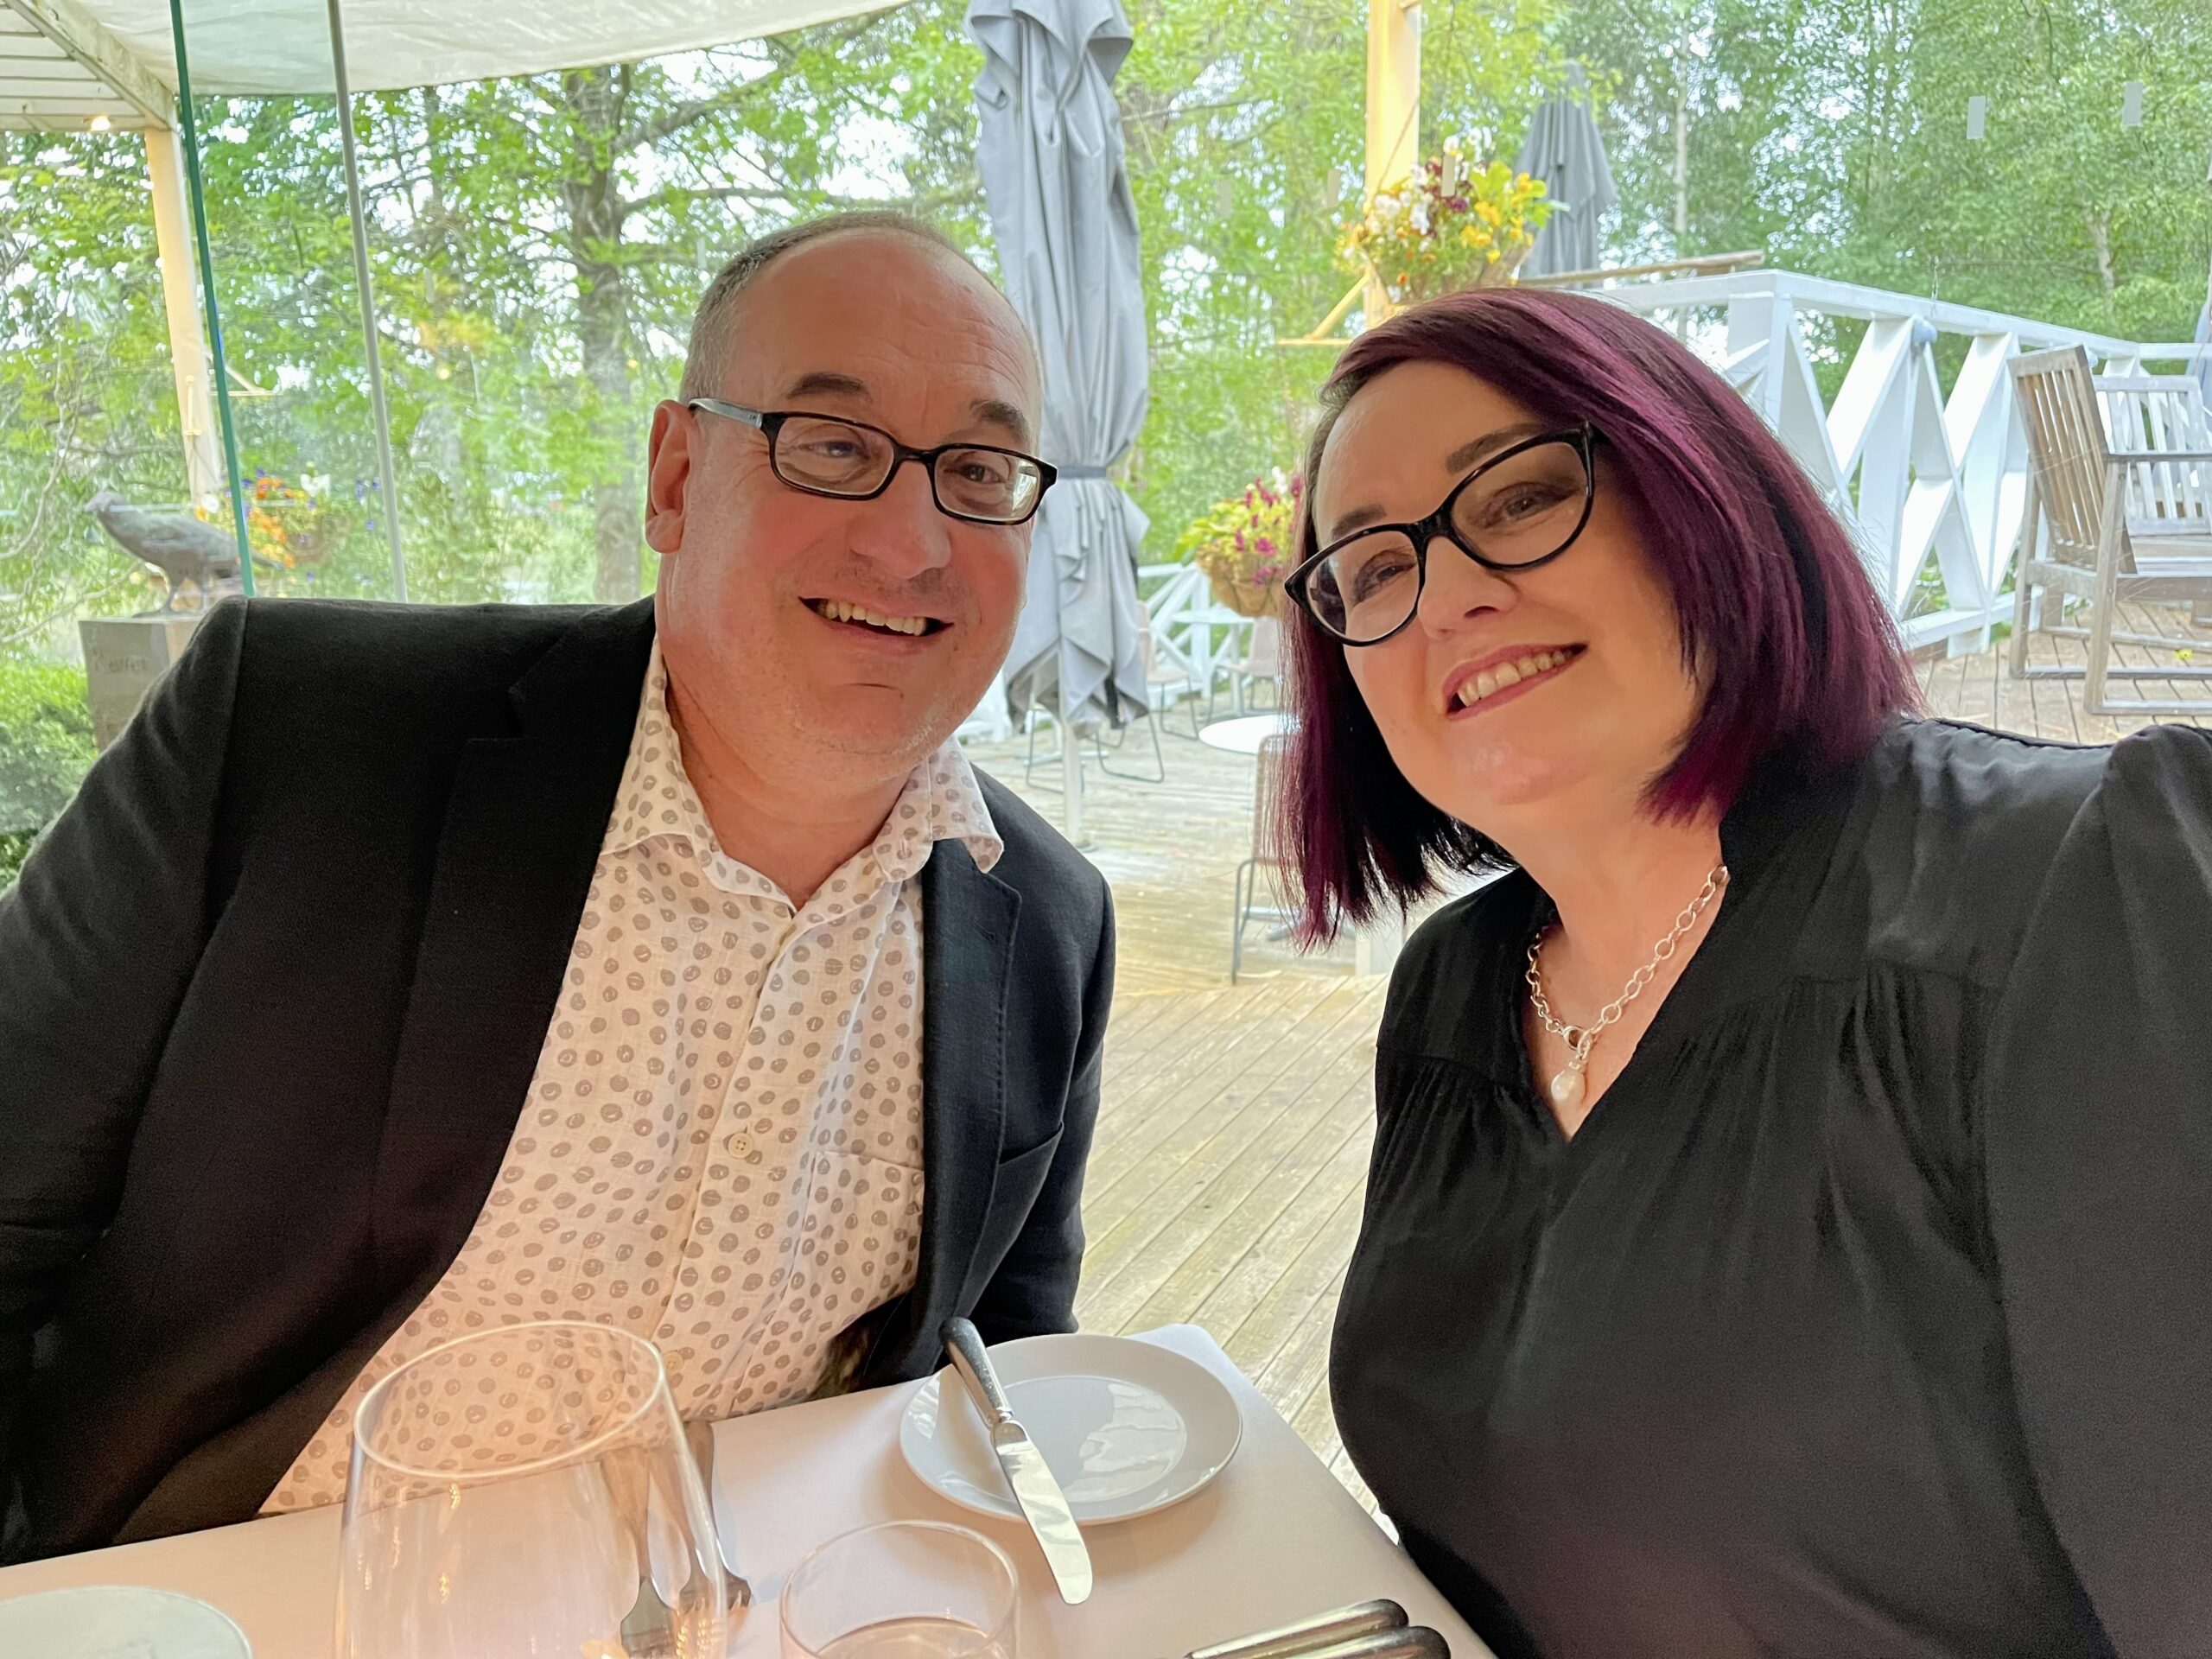 An image of Michael, left and Mardi, right. Michael has a collared shirt, white, with a dark jacket. Mardi is in a black dress wearing jewellery. They both wear glasses and are sitting at a table with white linen.  